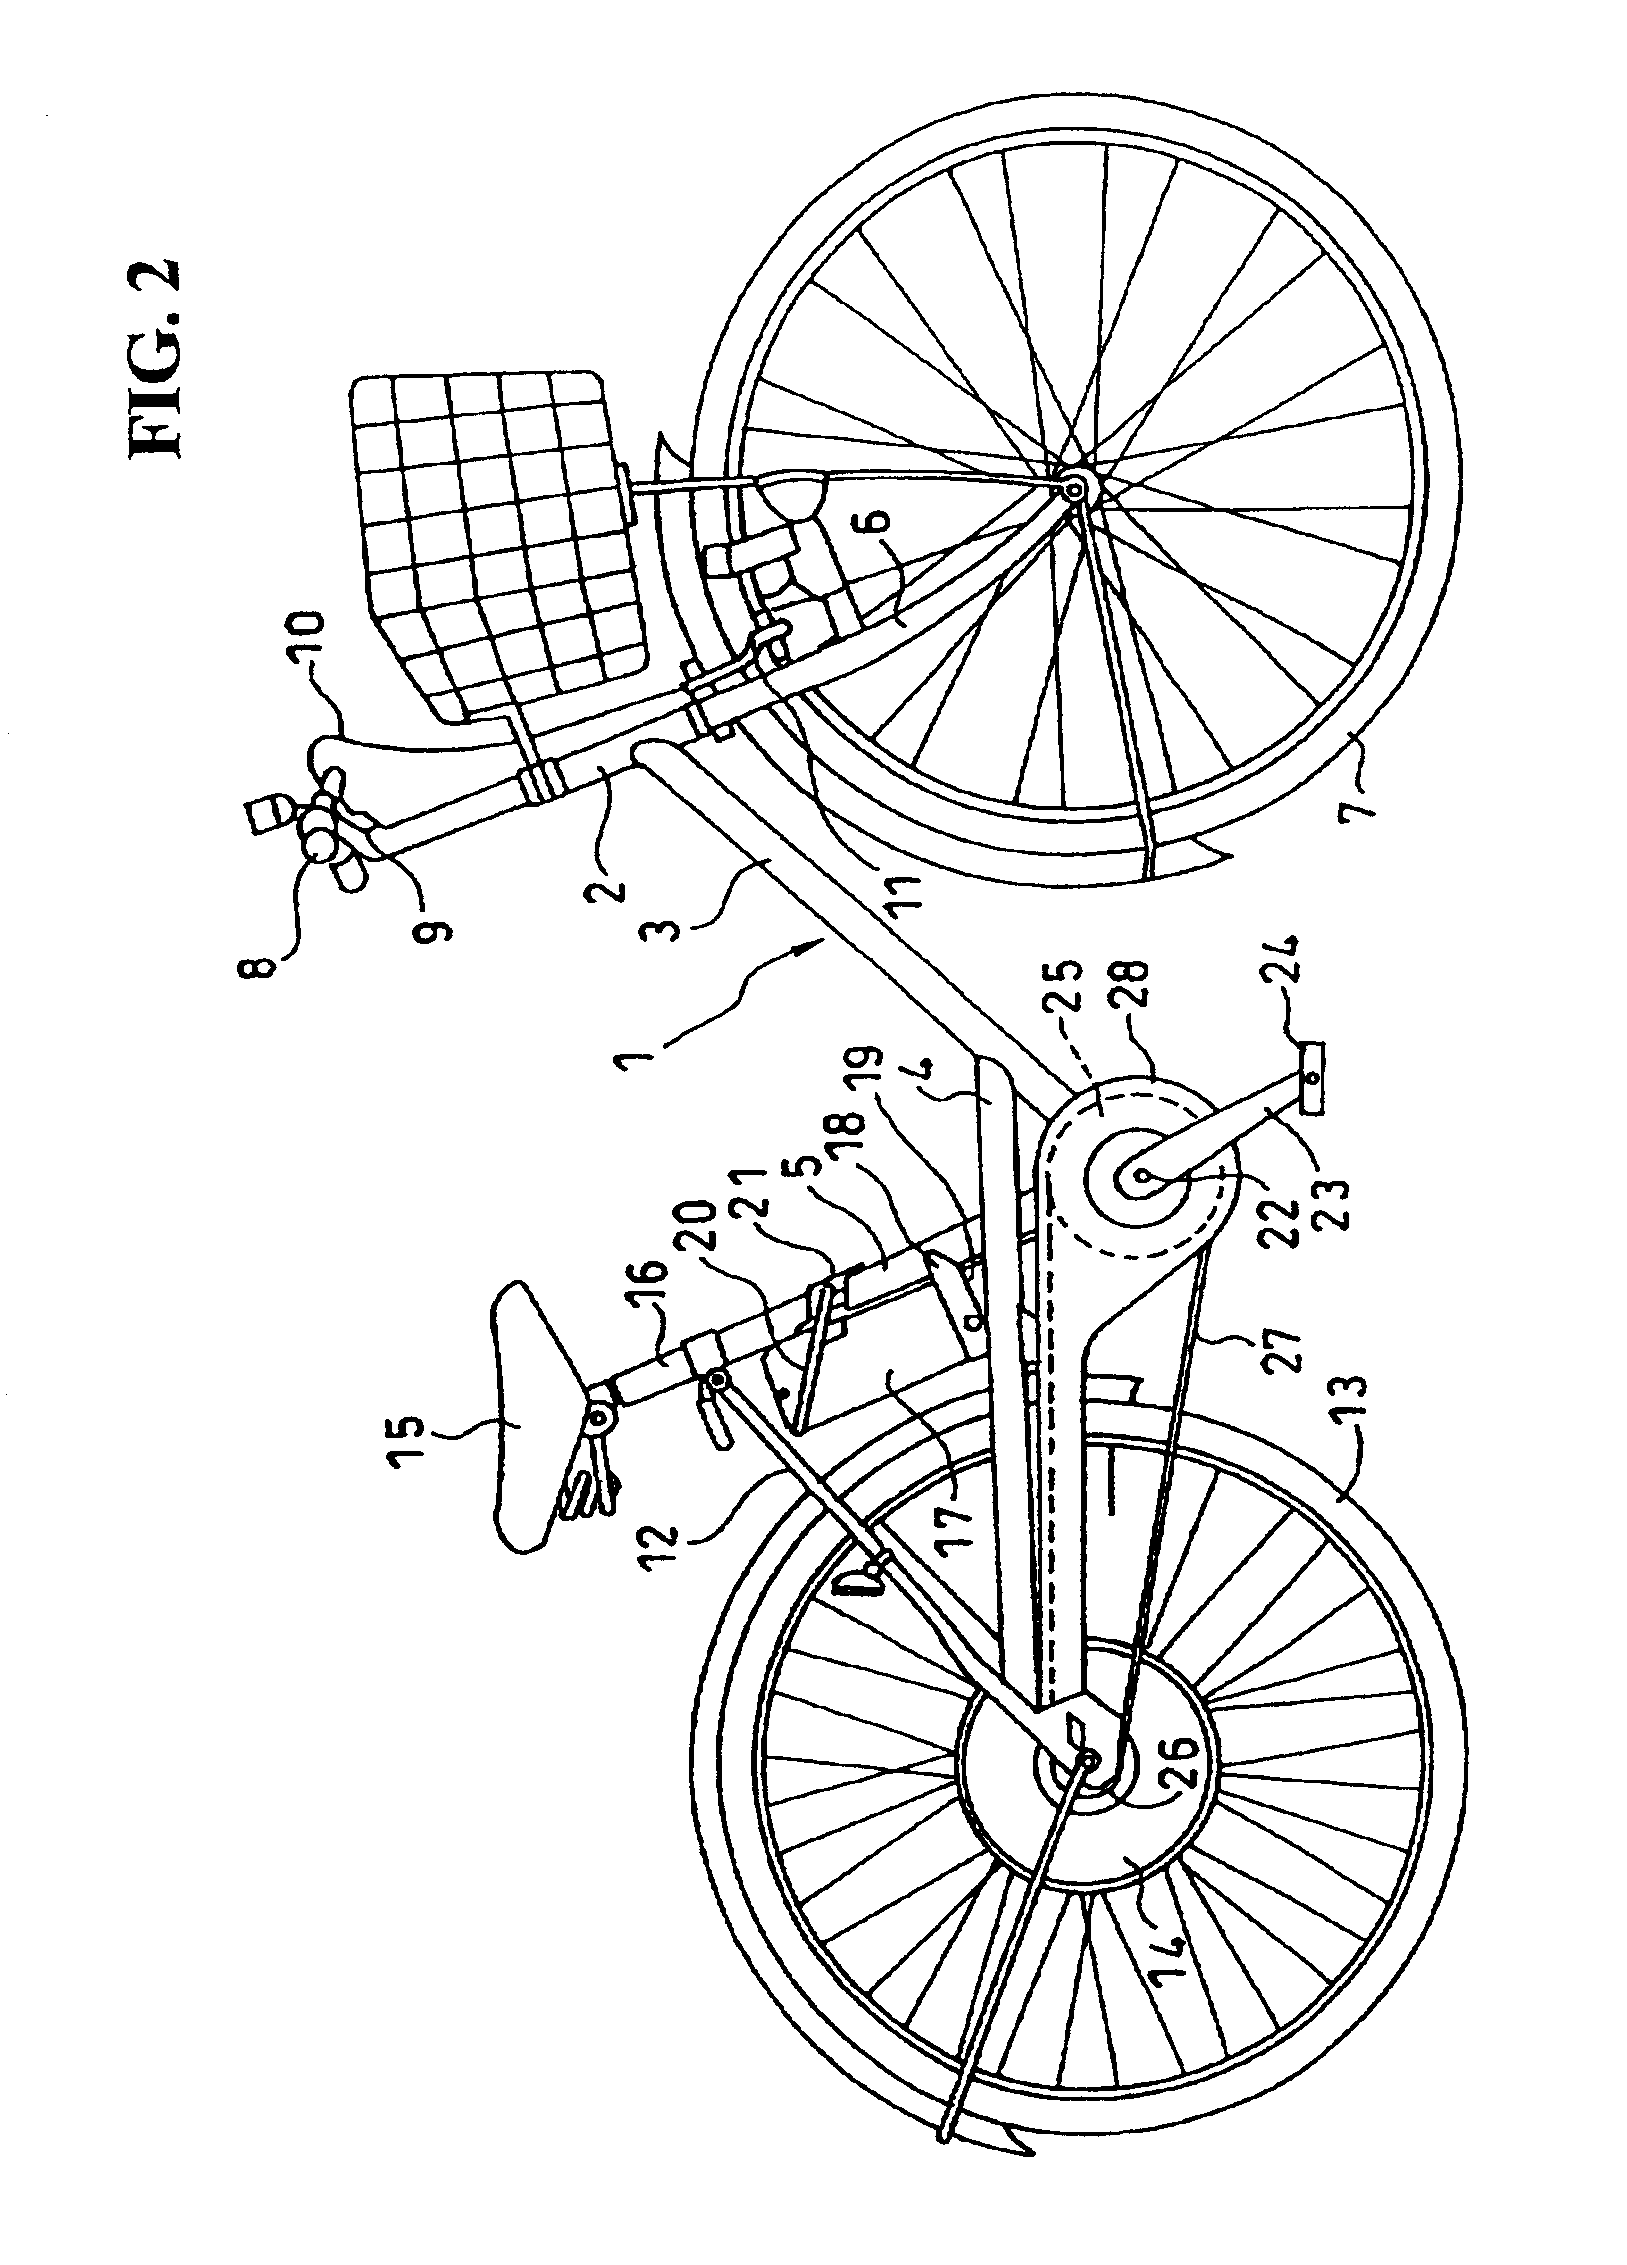 Control unit for motor-assisted bicycle